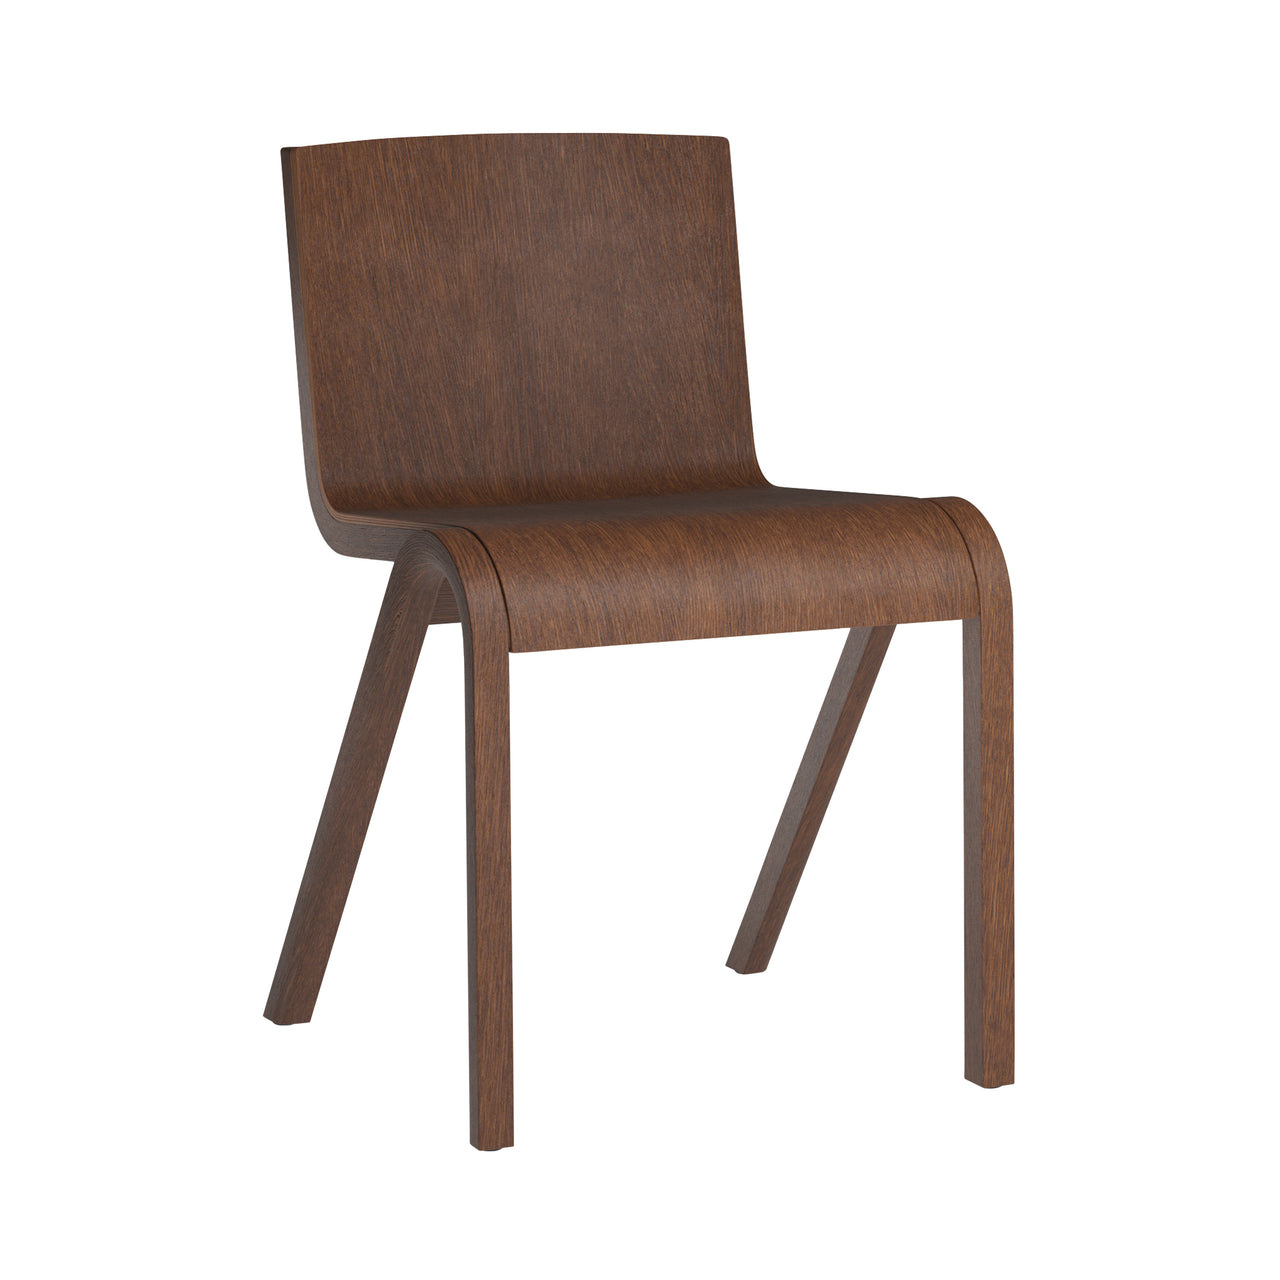 Ready Dining Chair: Stacking + Red Stained Oak